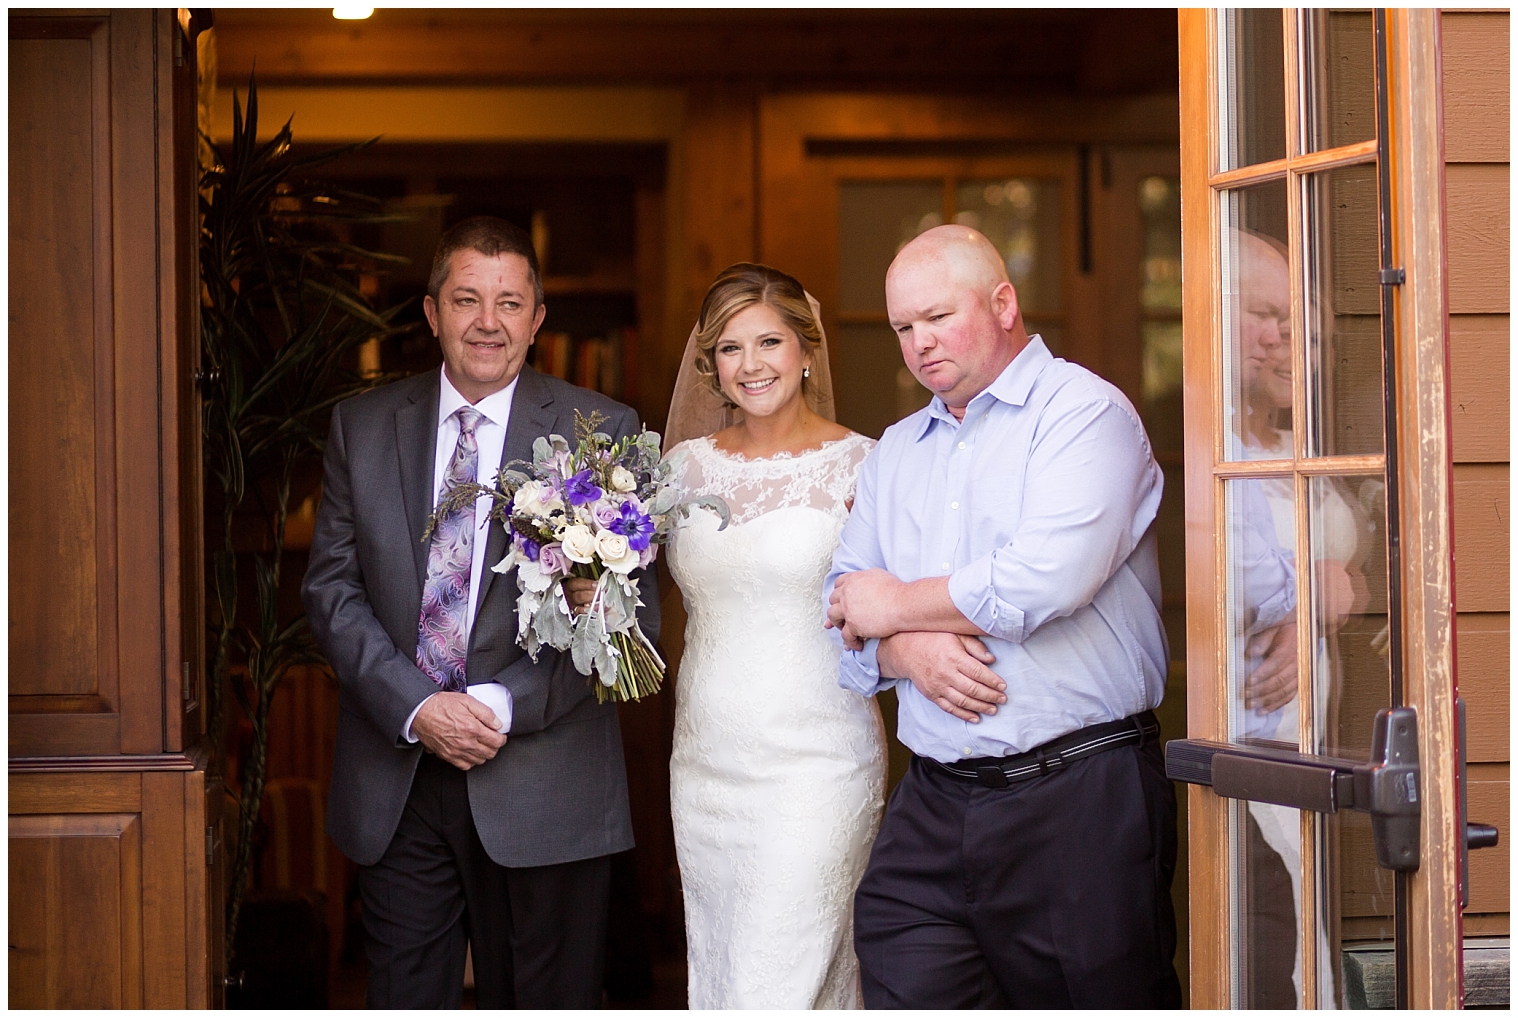 Bride is walked down the aisle by both her fathers at her Breckenridge mountain wedding.